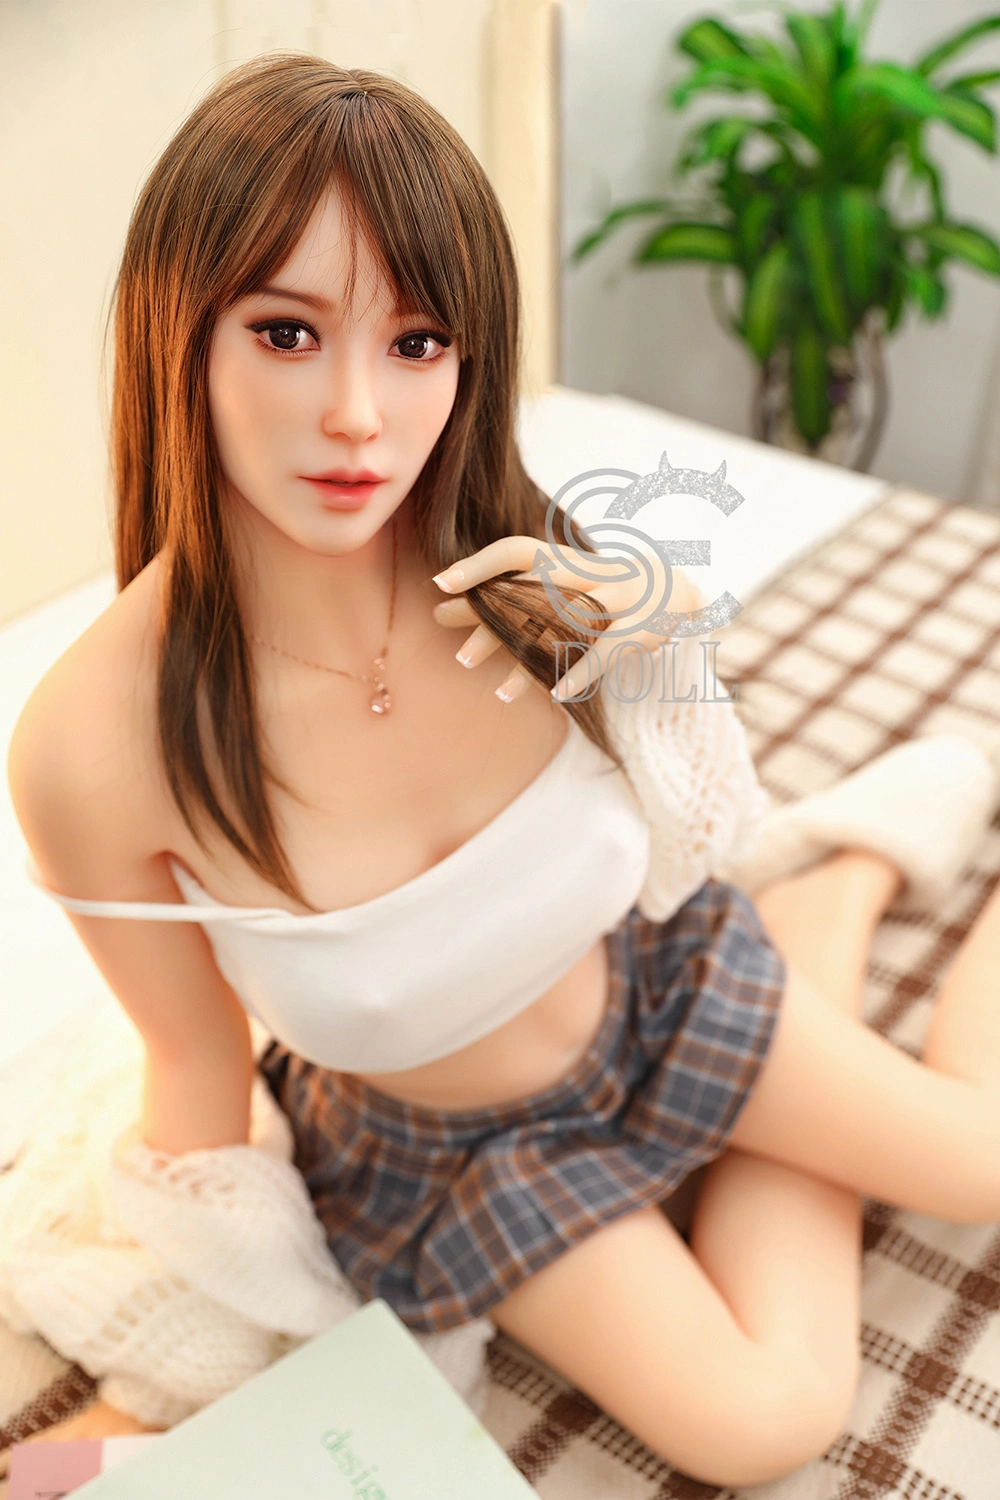 female college student sex doll